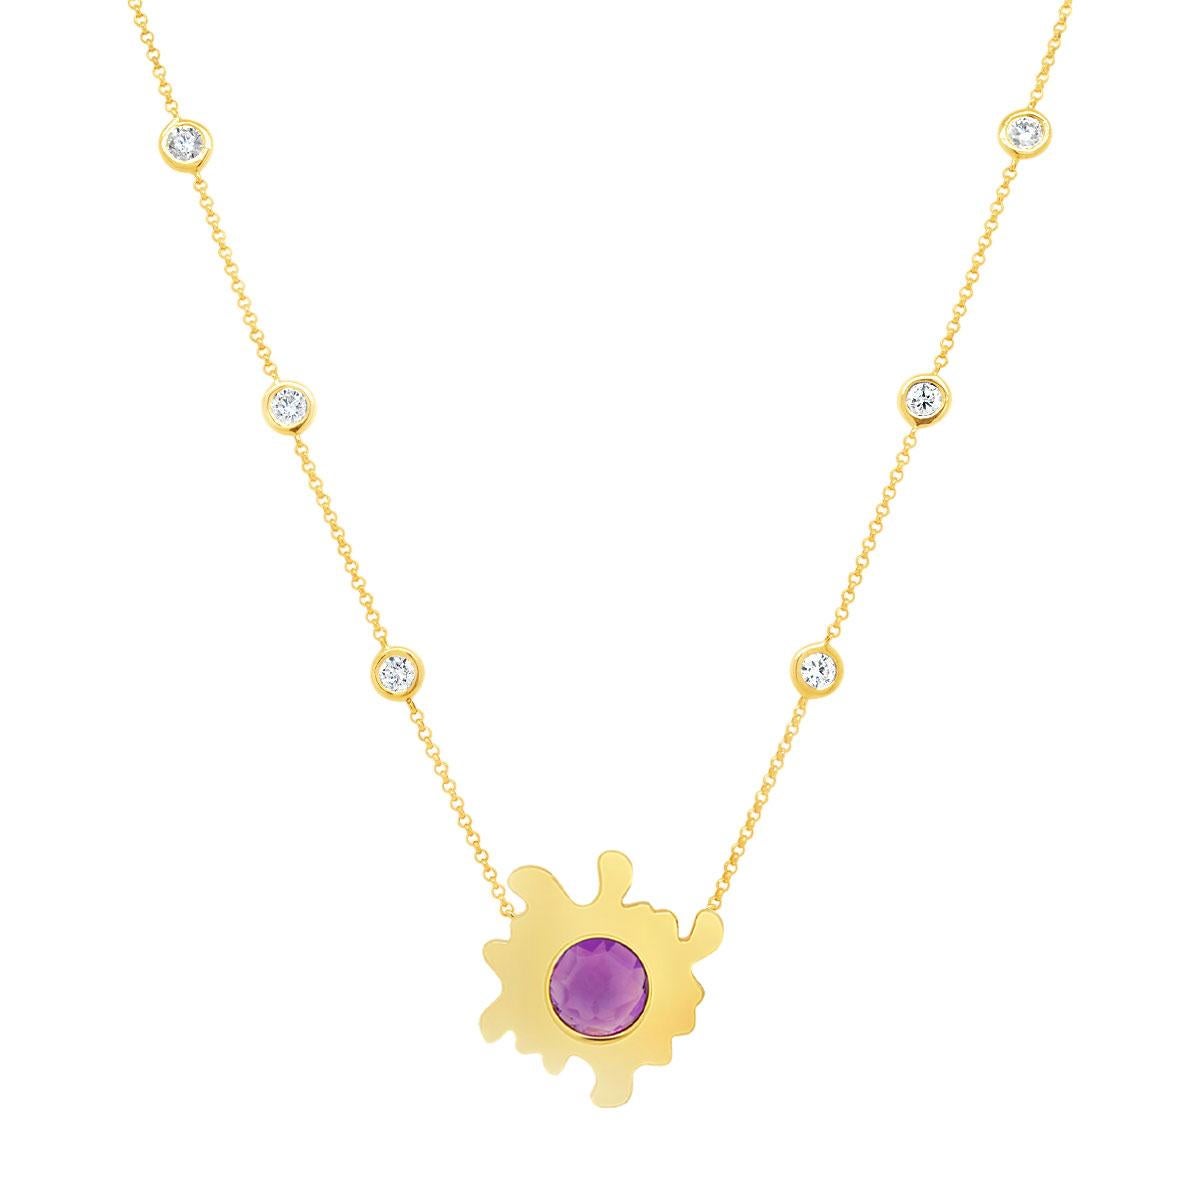 Purple haze all in your brain. This one of a kind necklace, featuring a round amethyst and tomato enamel, is designed to challenge what we consider 